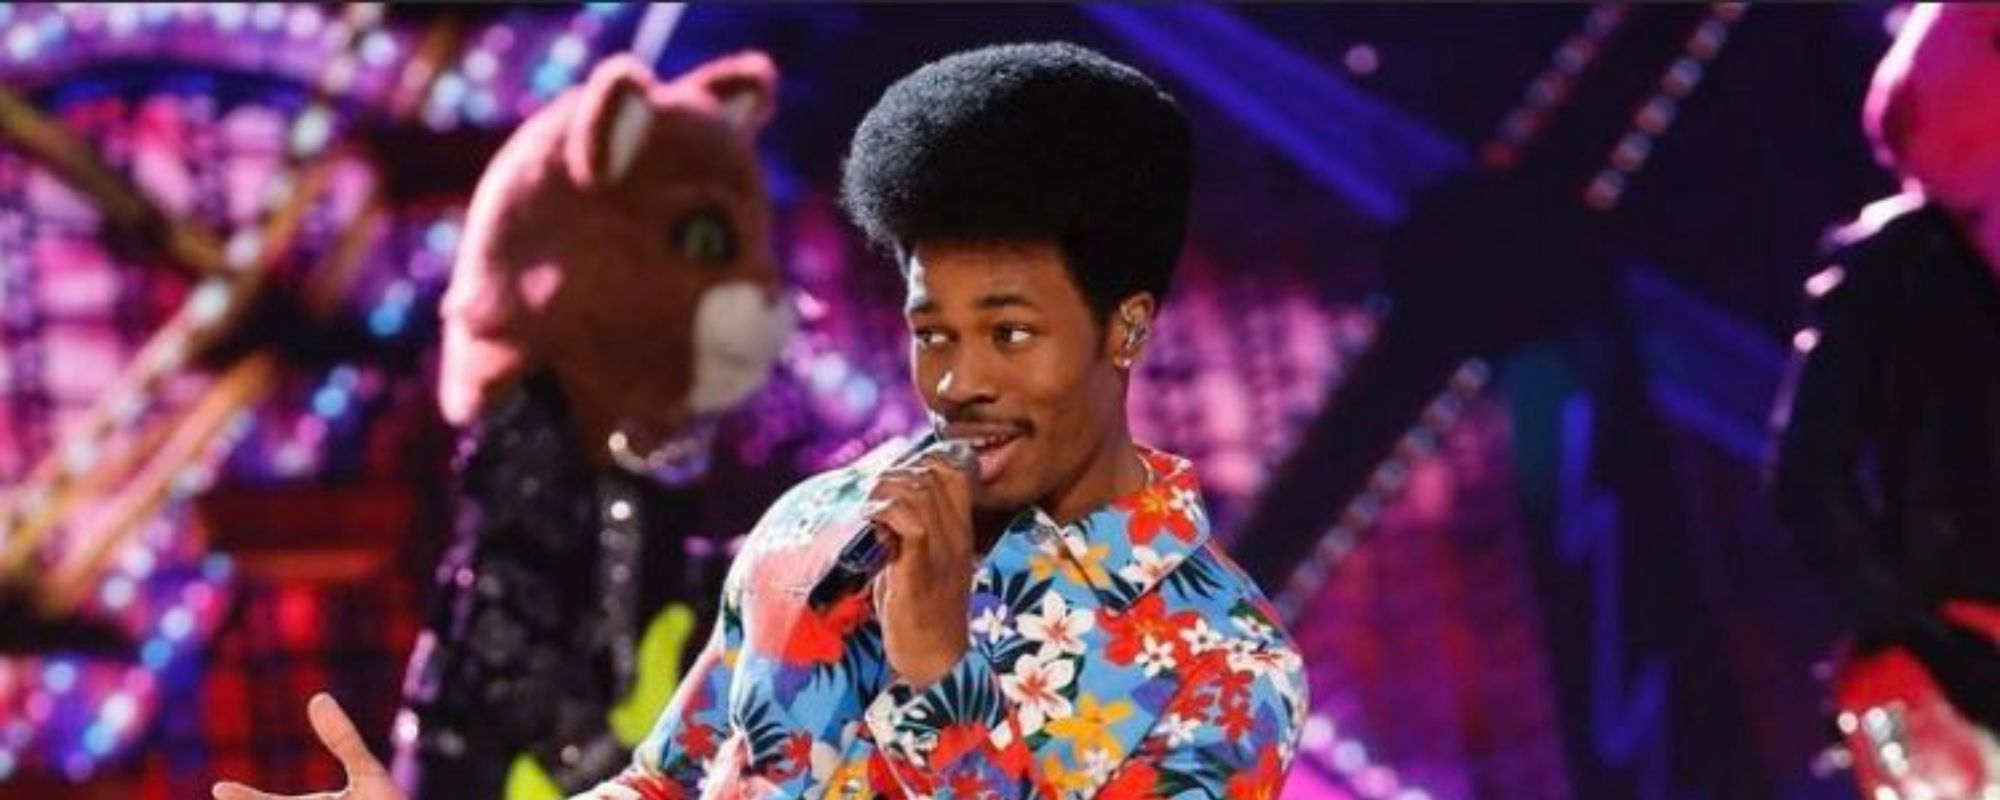 Nathan Chester’s Funky Rendition of The Isley Brothers’ “It’s Your Thing” Has ‘The Voice’ Fans Crowning Him Champion